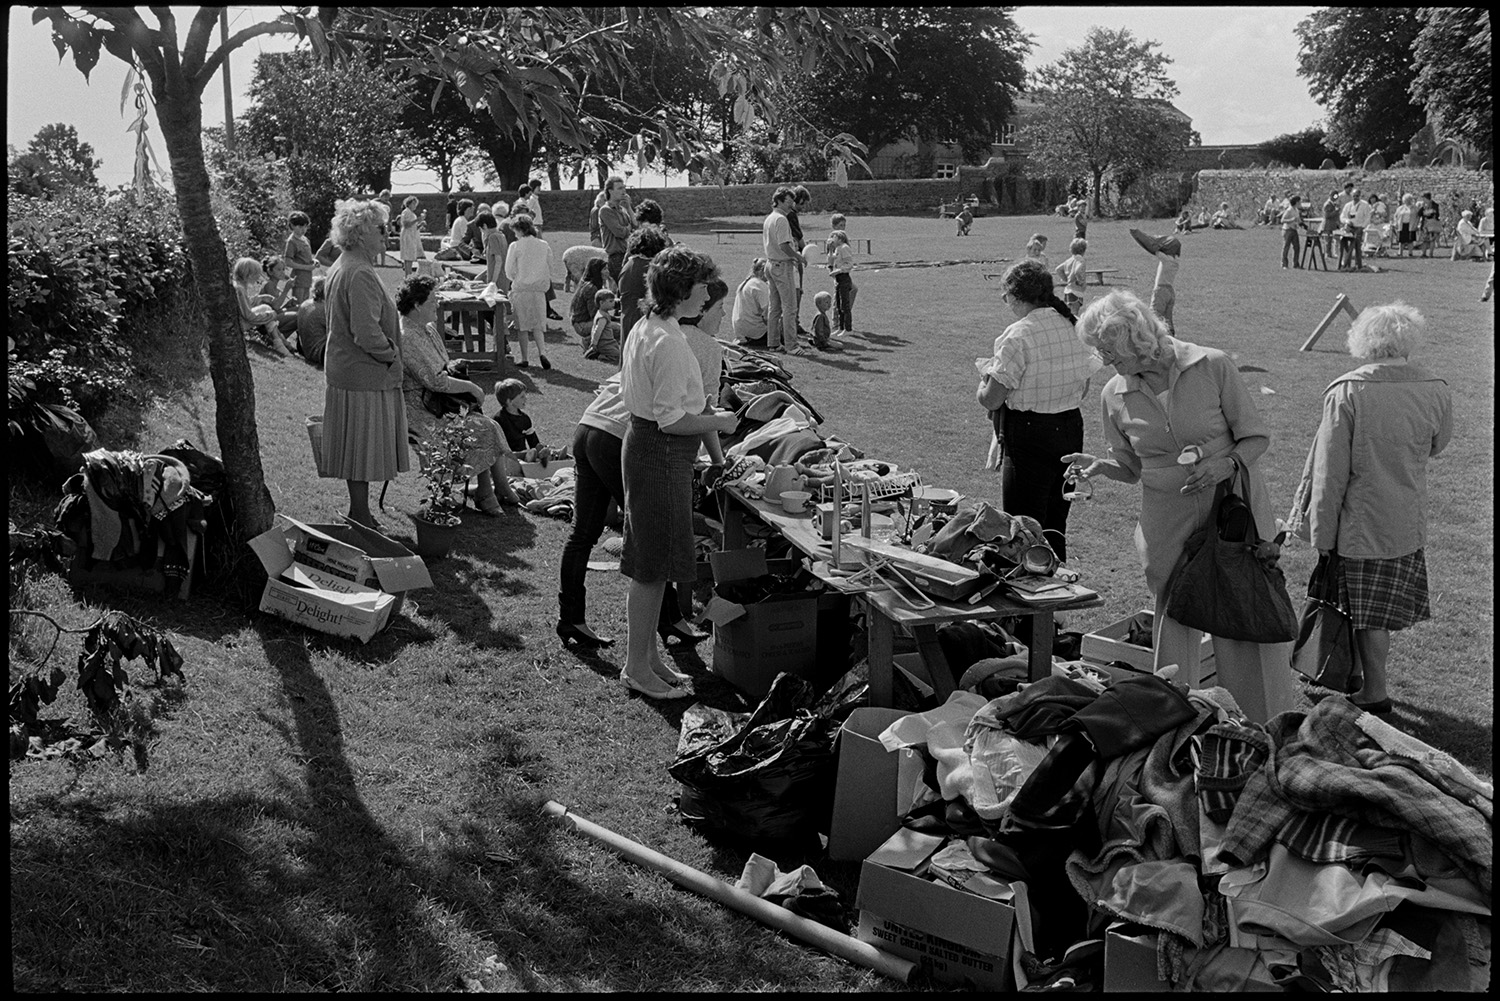 Village revel, fete, folk dance on green, stalls, jumble, guess weight of the Ram, fancy dress.
[Stallholders and visitors at Beaford Revel on the village green. Women looking at a jumble and bric-a-brac stall can be seen in the foreground.]